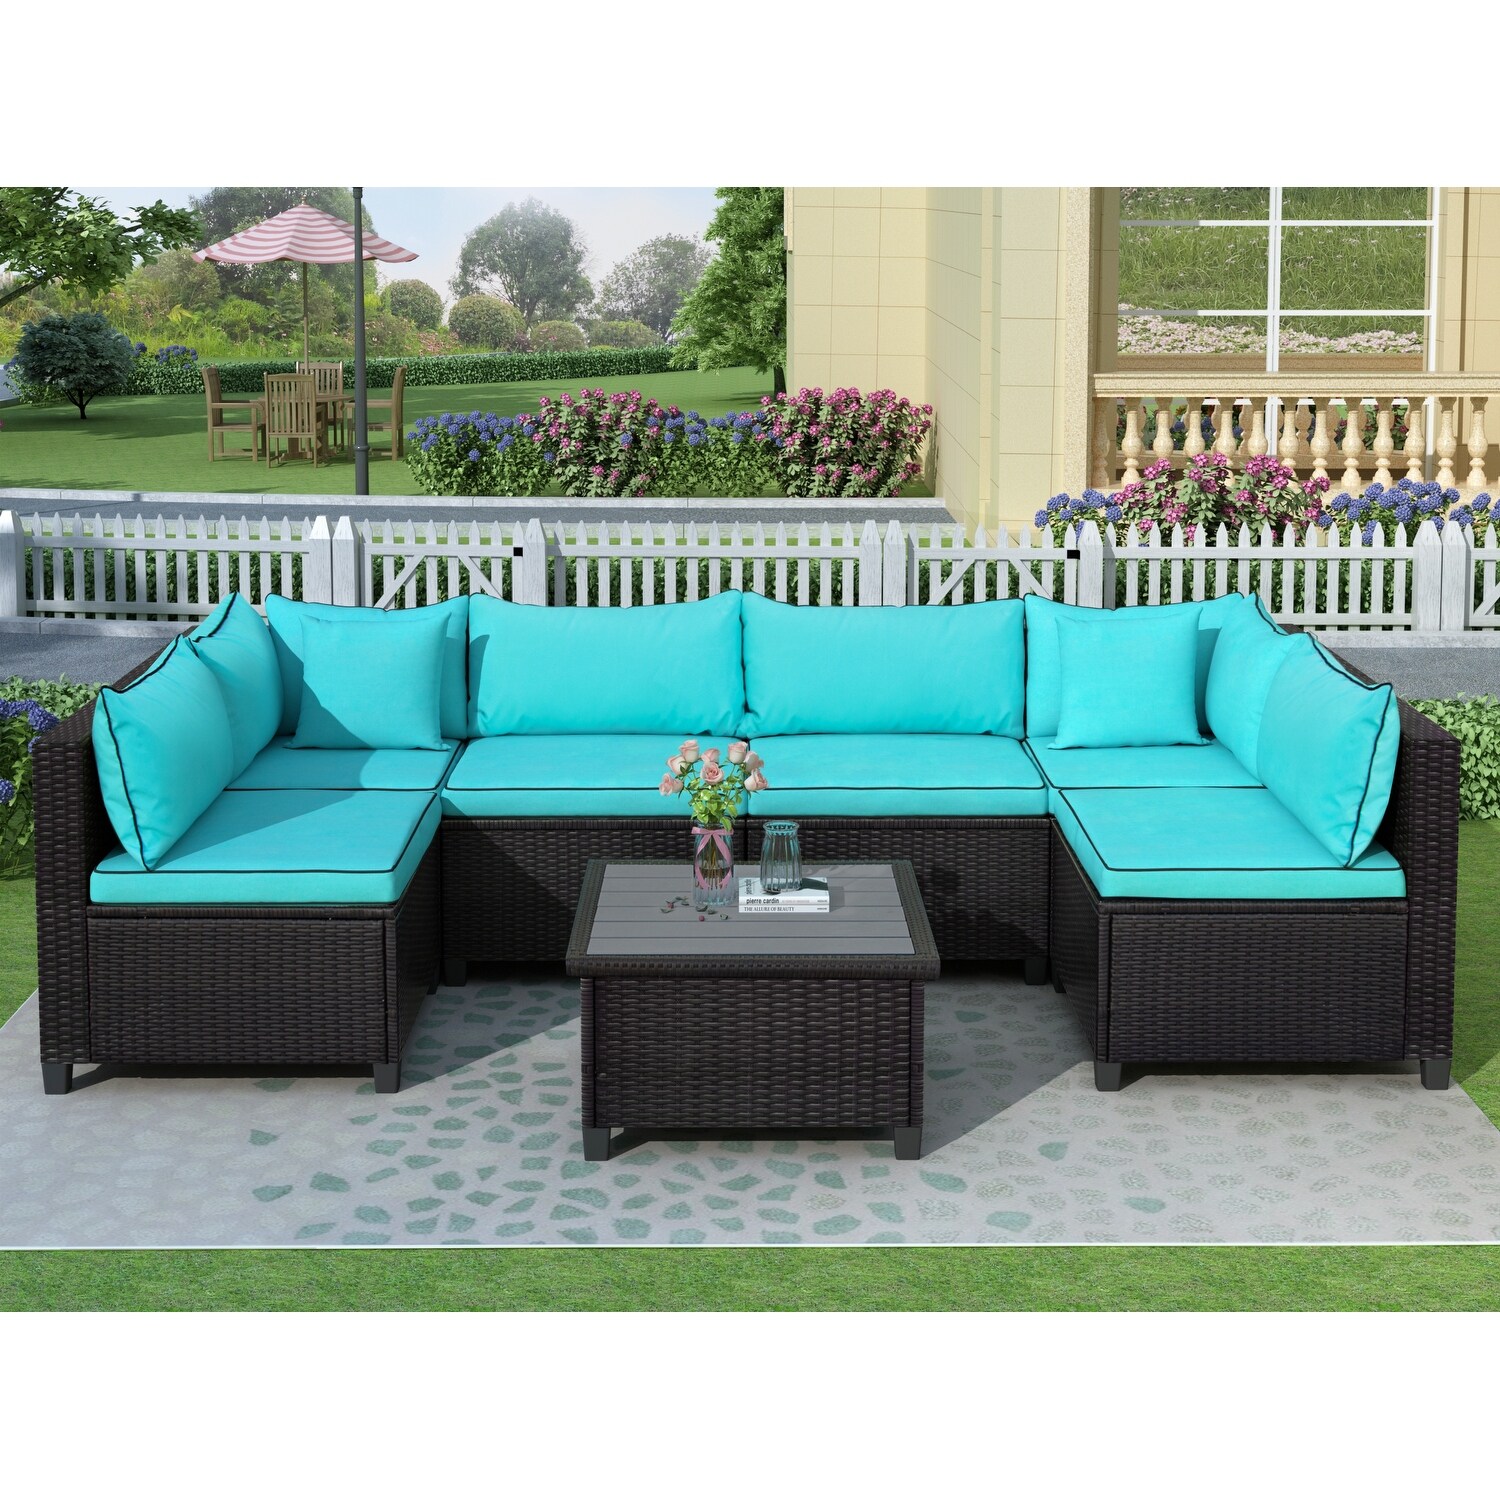 Blue Outdoor Rattan Wicker Sofa Set With Planked Coffee Table  U-shape Design Sectional Sofa  With 2 Characteristic Pillows